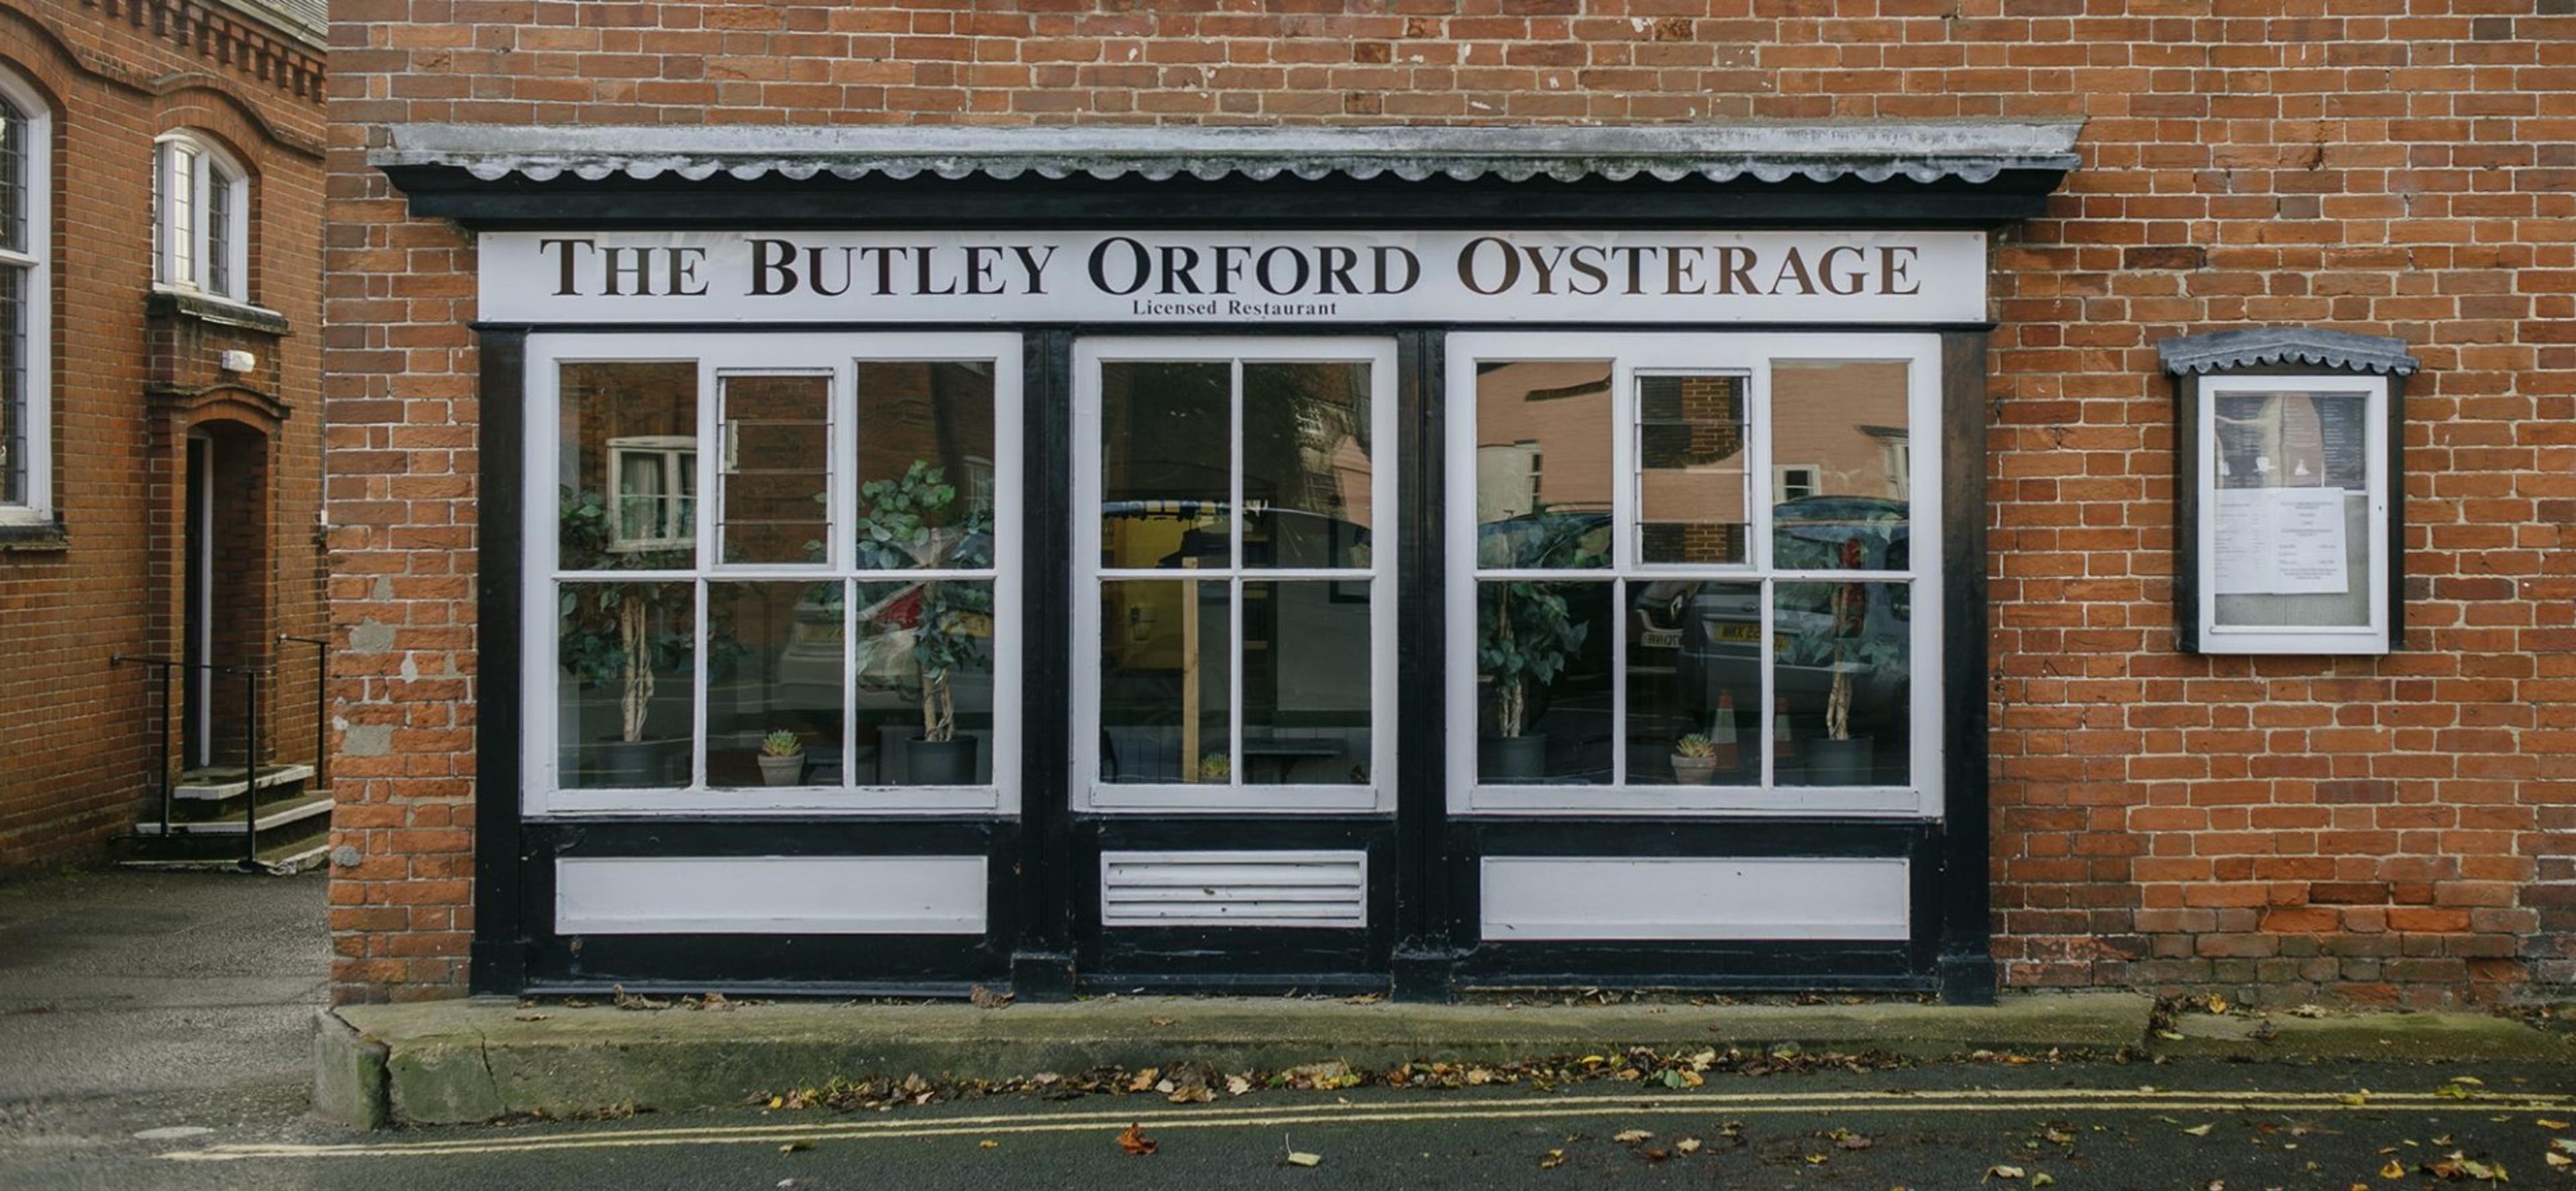 Butley Orford Oysterage